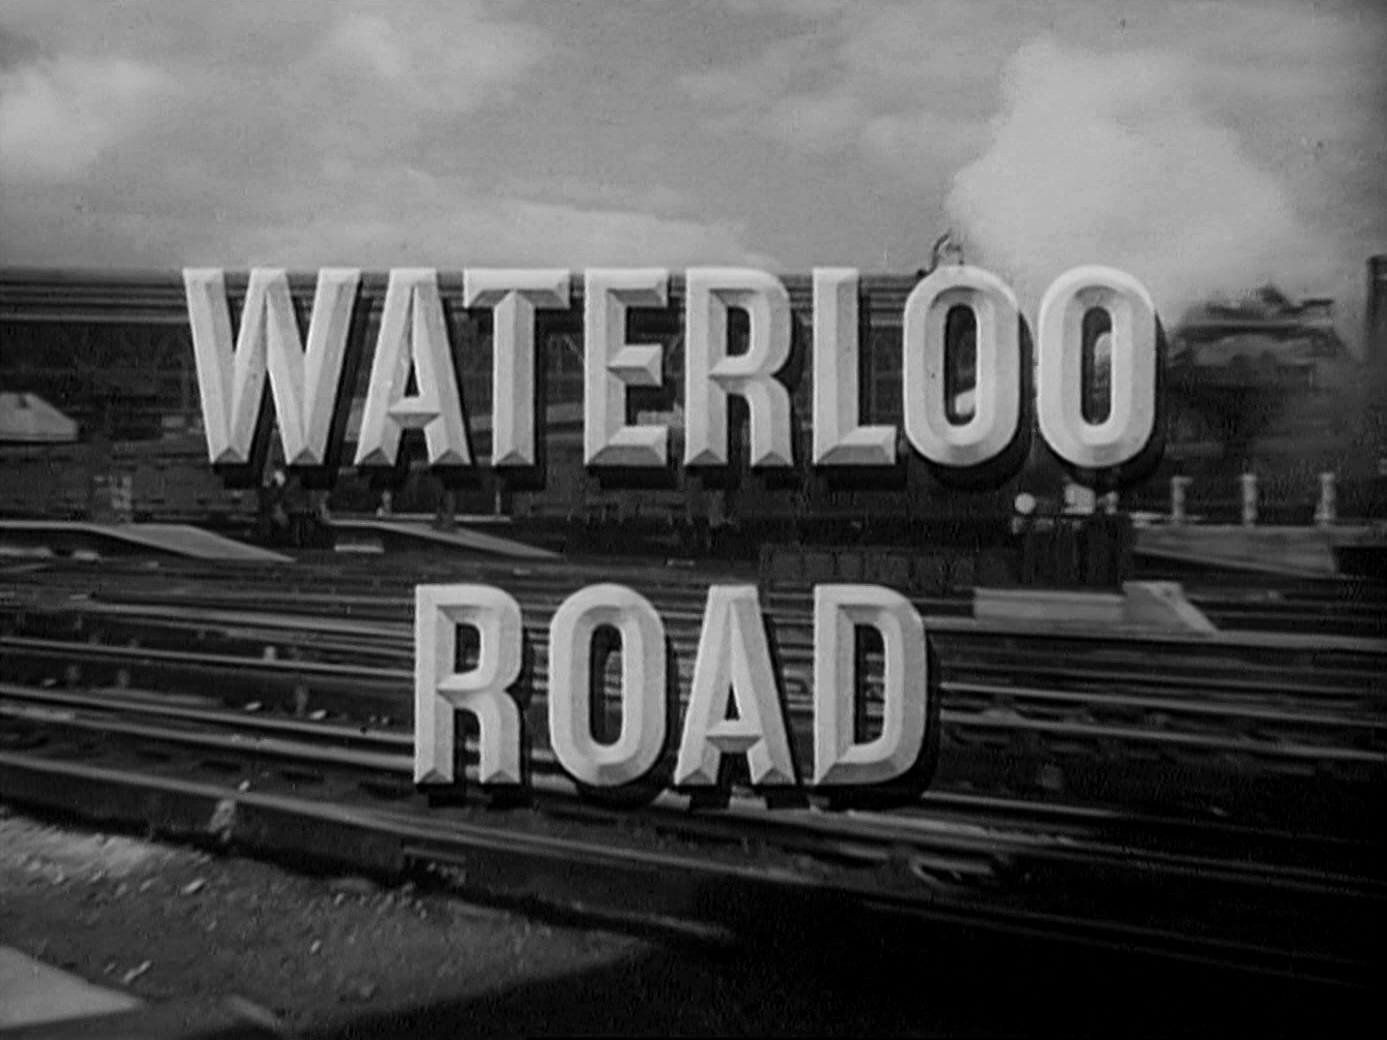 Main title from Waterloo Road (1945) (4)